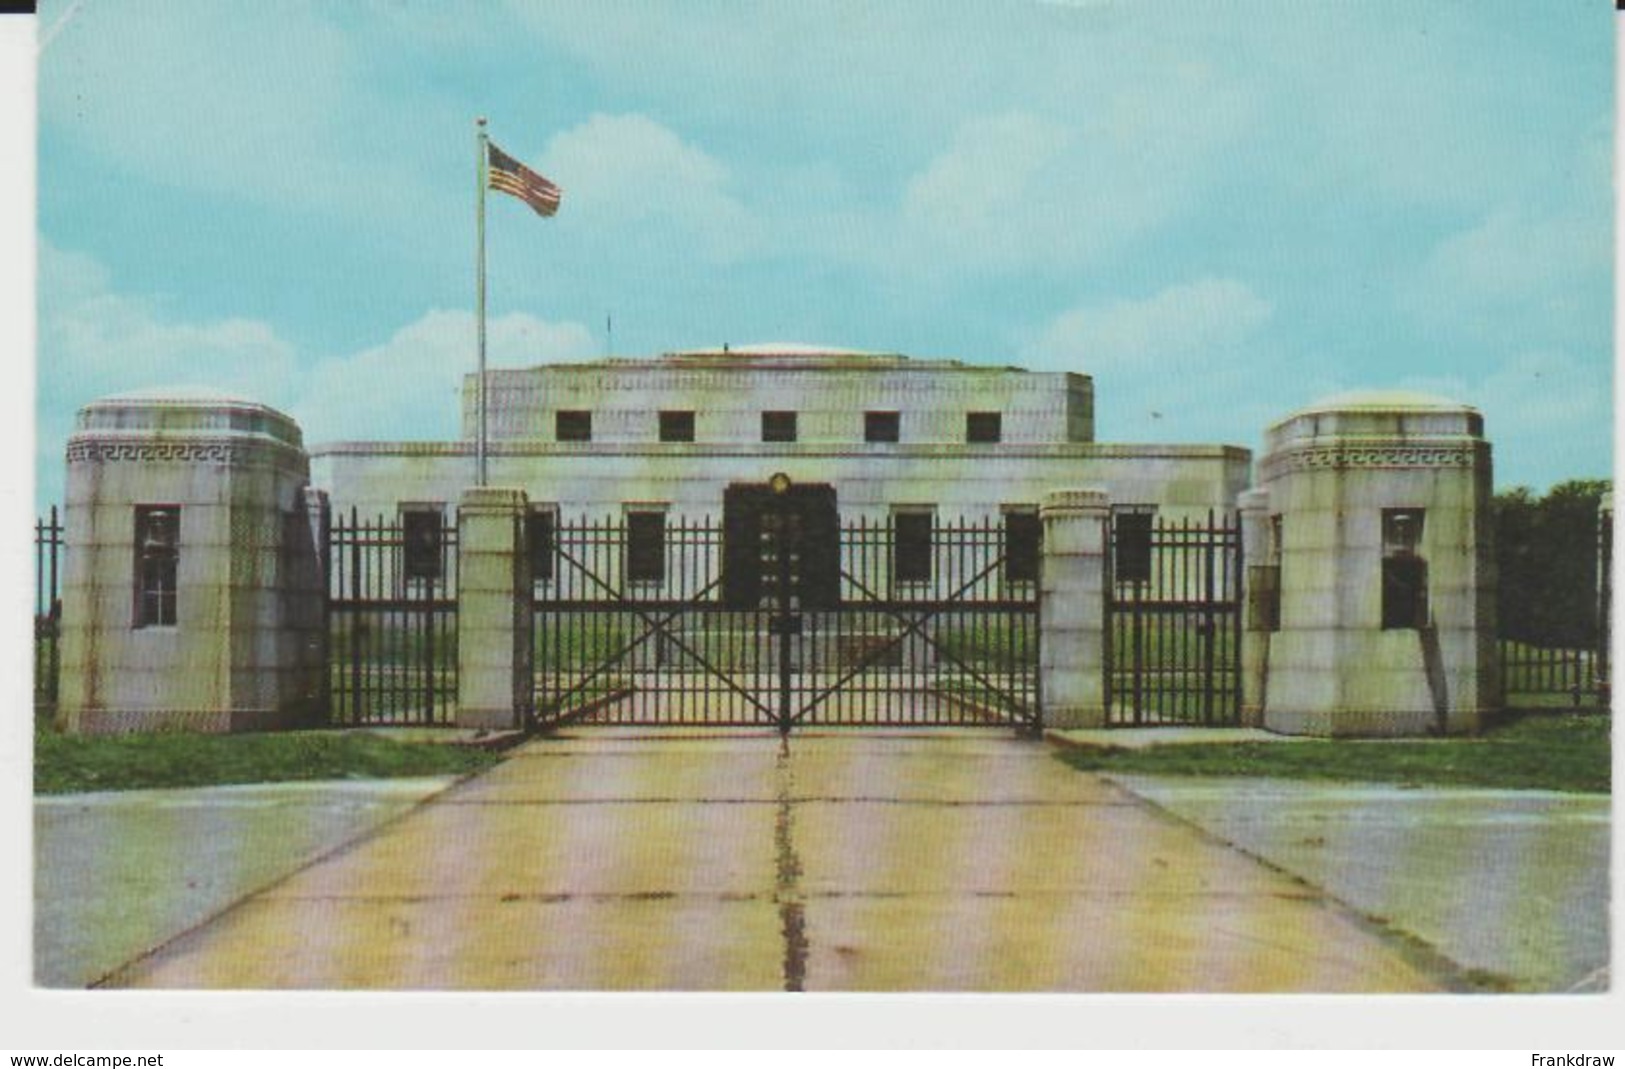 Postcard - United States Gold Depository, Fort Knox, Kentucky - Unused Very Good - Unclassified